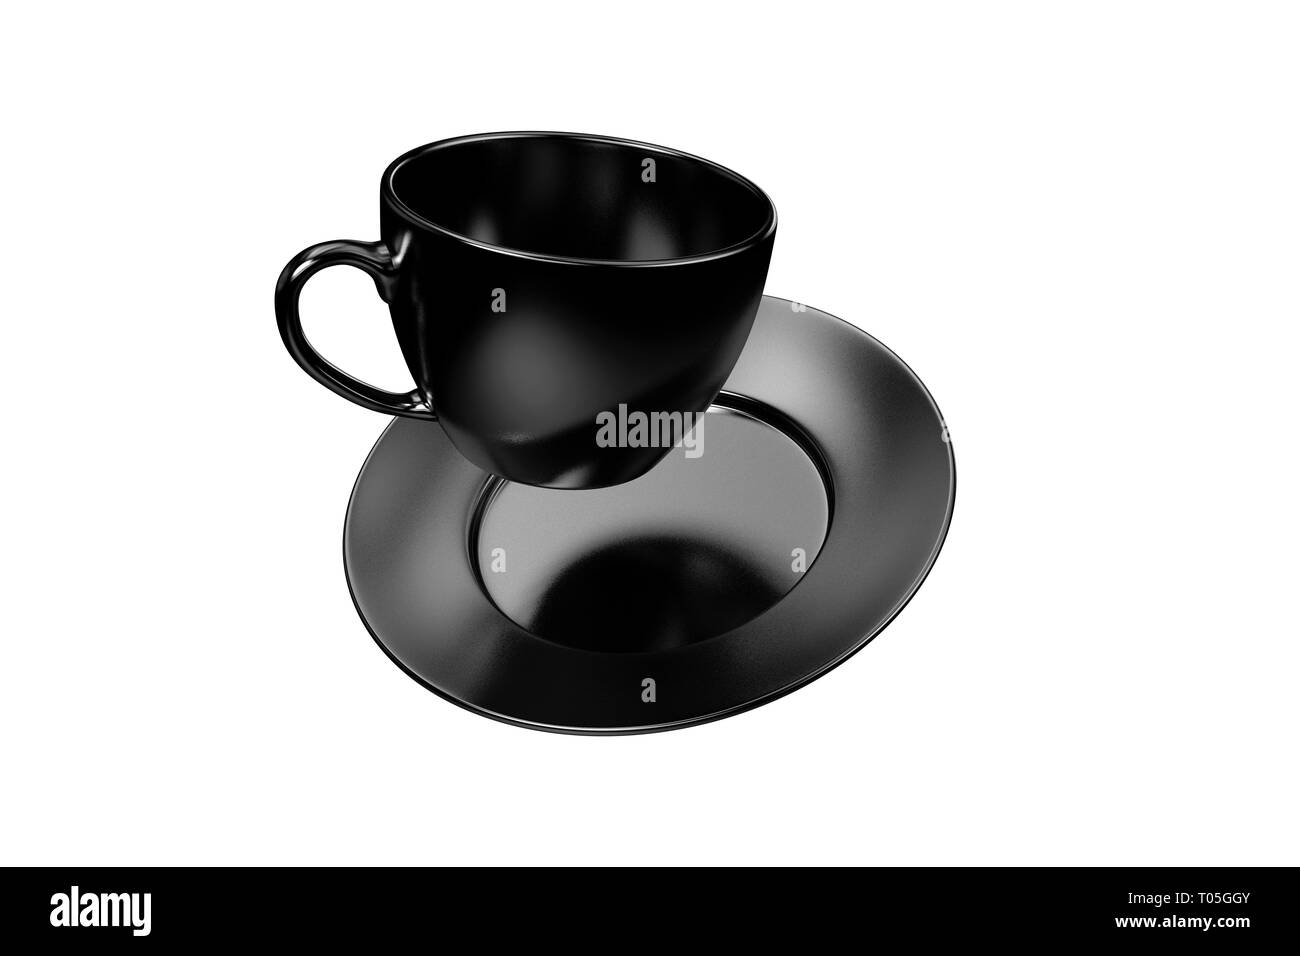 https://c8.alamy.com/comp/T05GGY/3d-rendering-of-black-glossy-coffee-mug-mockup-template-blank-and-empty-isolated-on-white-background-T05GGY.jpg